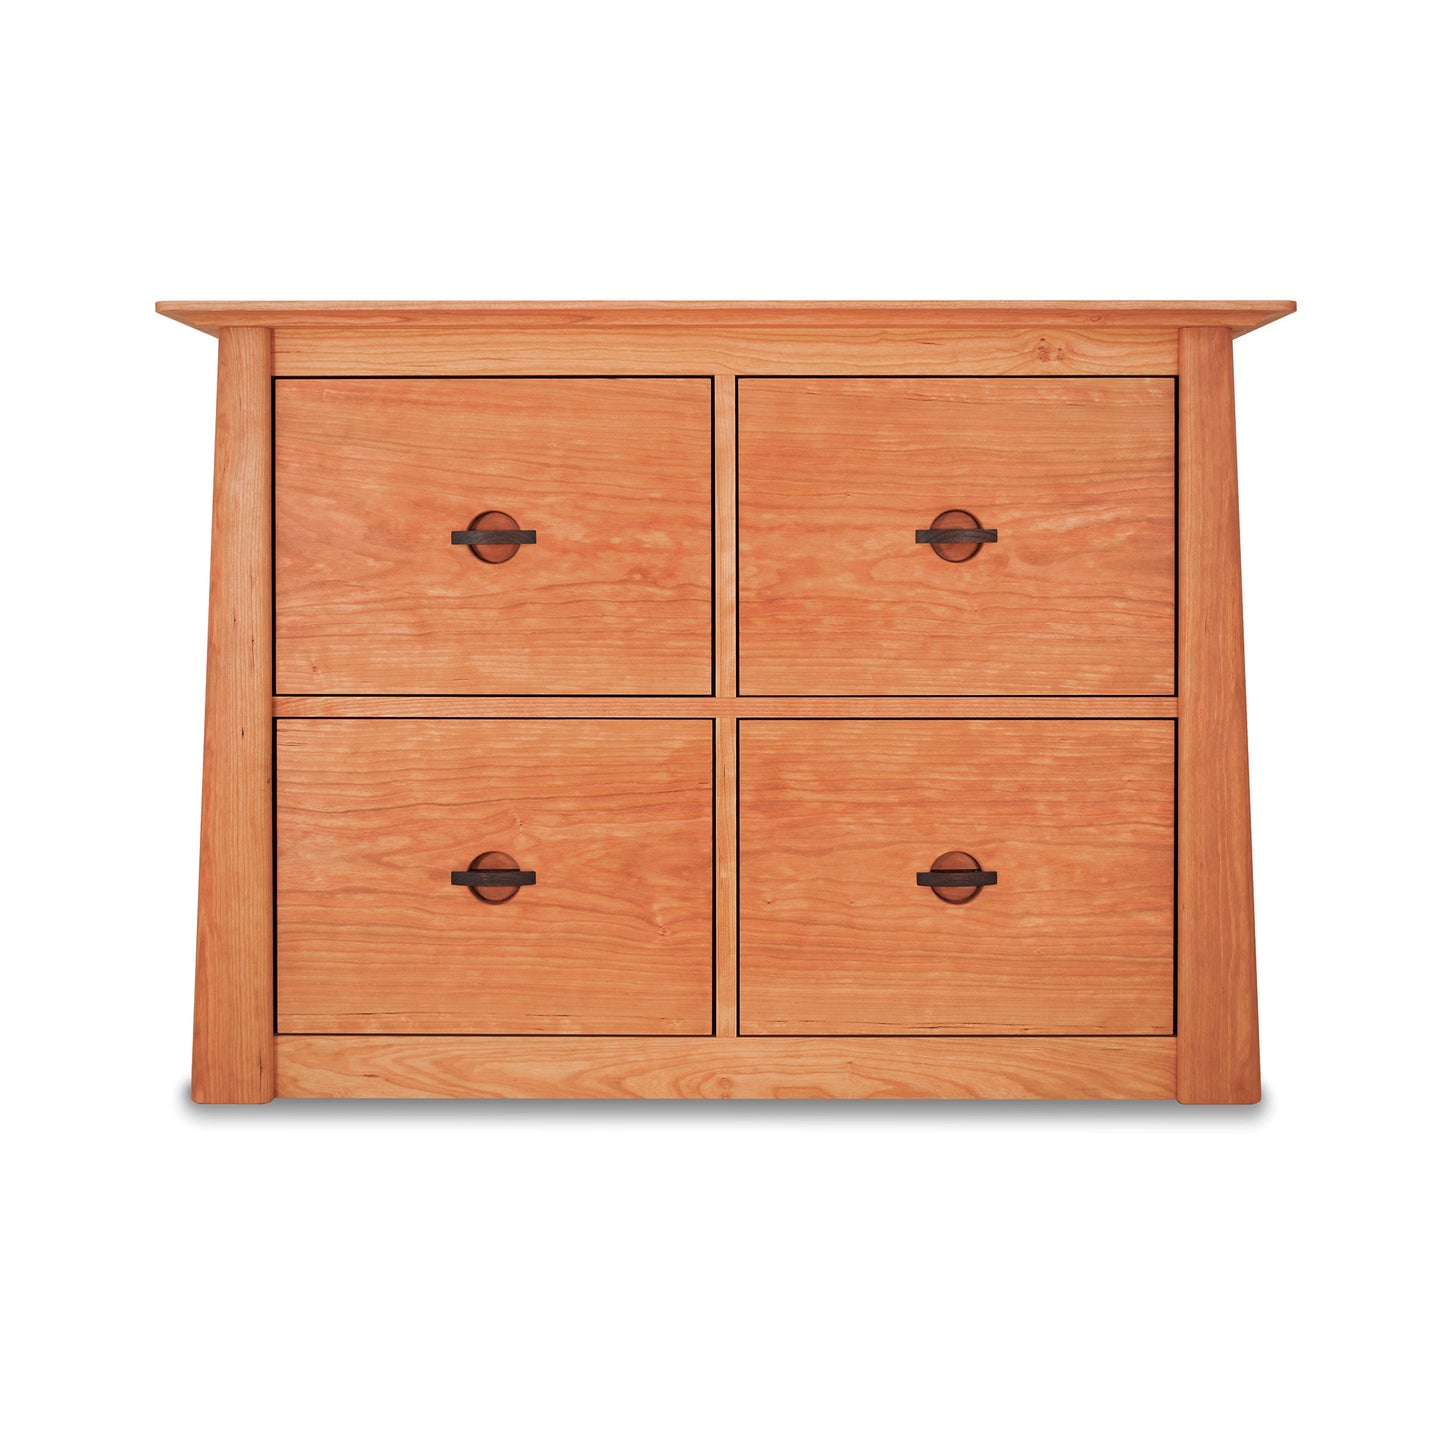 A solid Cherry Moon 4-Drawer File Credenza with four compartments and round handles, isolated on a white background by Maple Corner Woodworks.